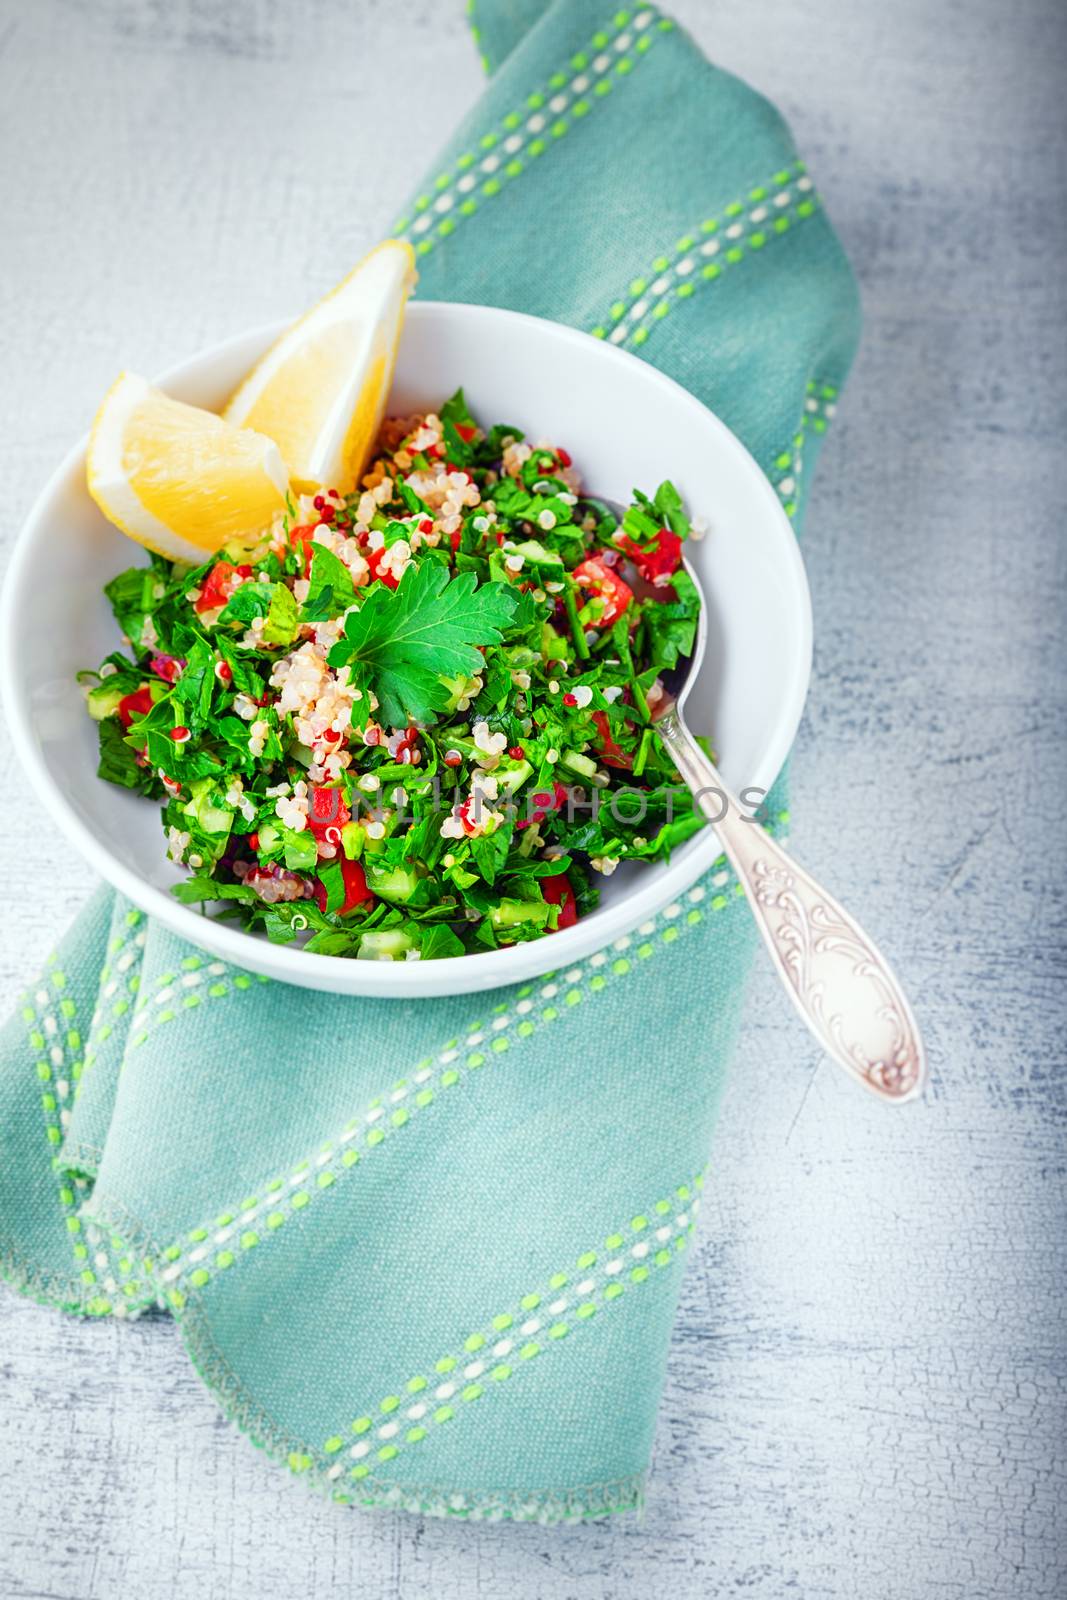 Quinoa tabbouleh salad on a wooden table.